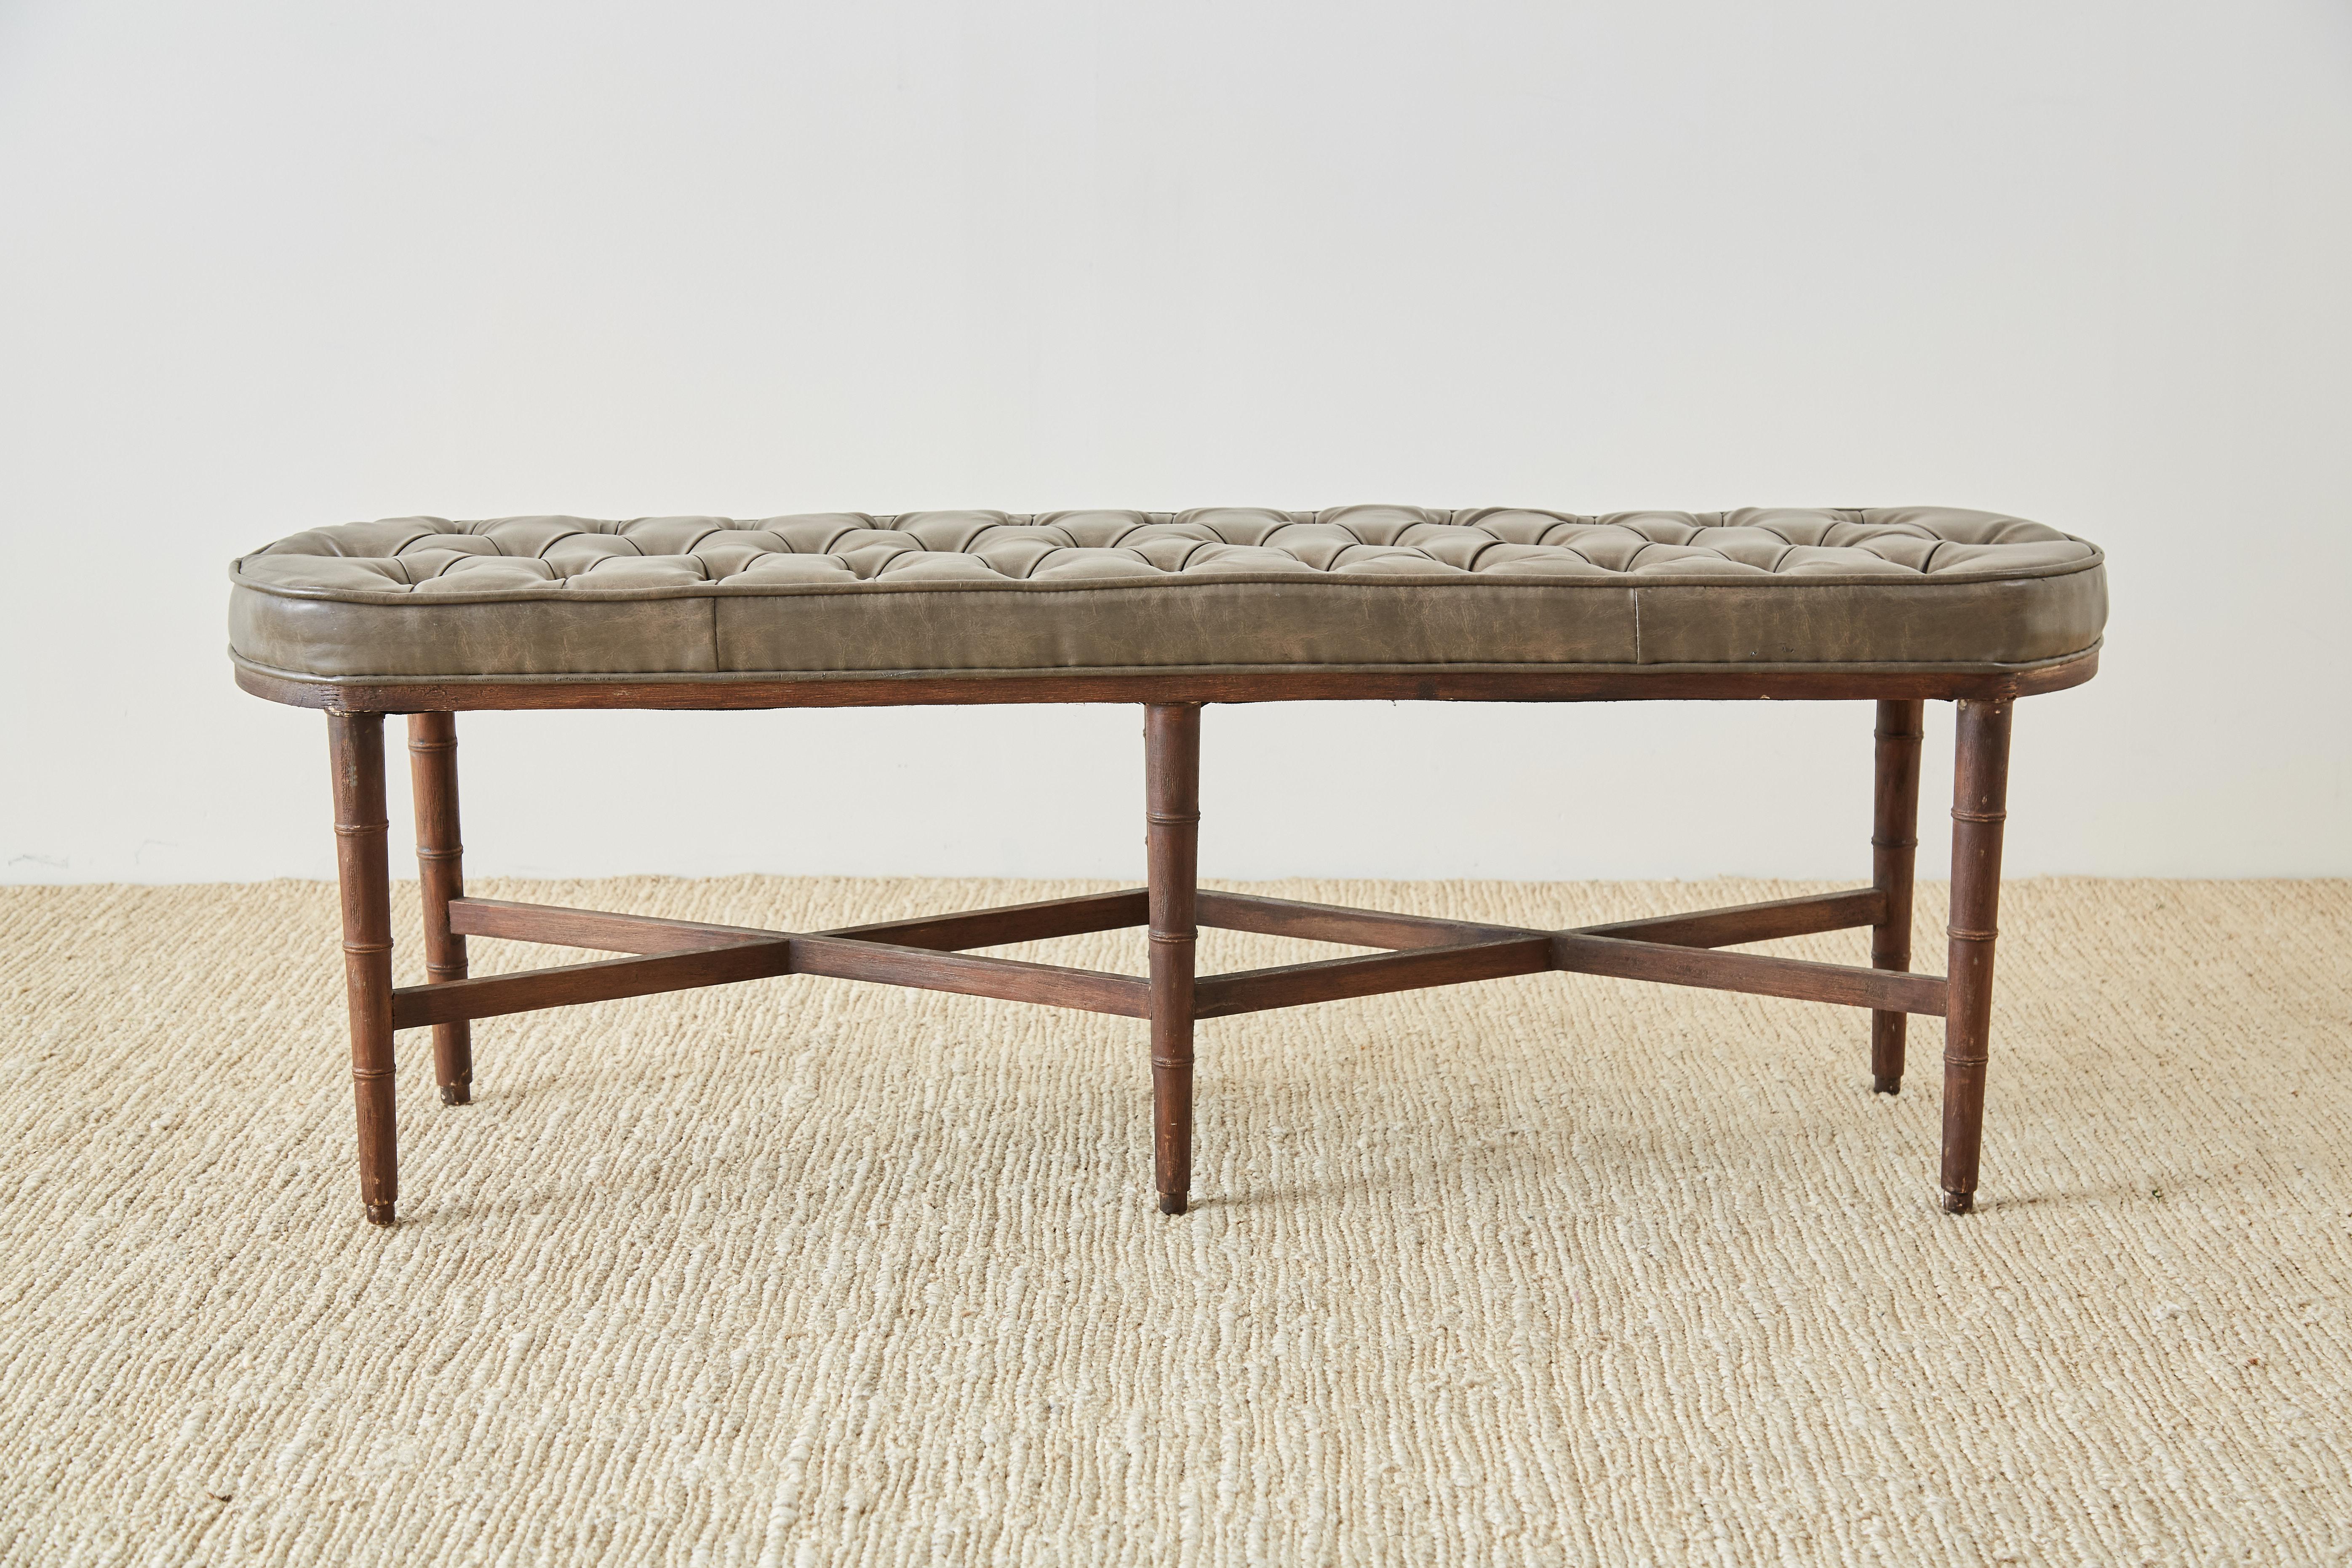 20th Century Midcentury Regency Style Faux Bamboo Tufted Bench